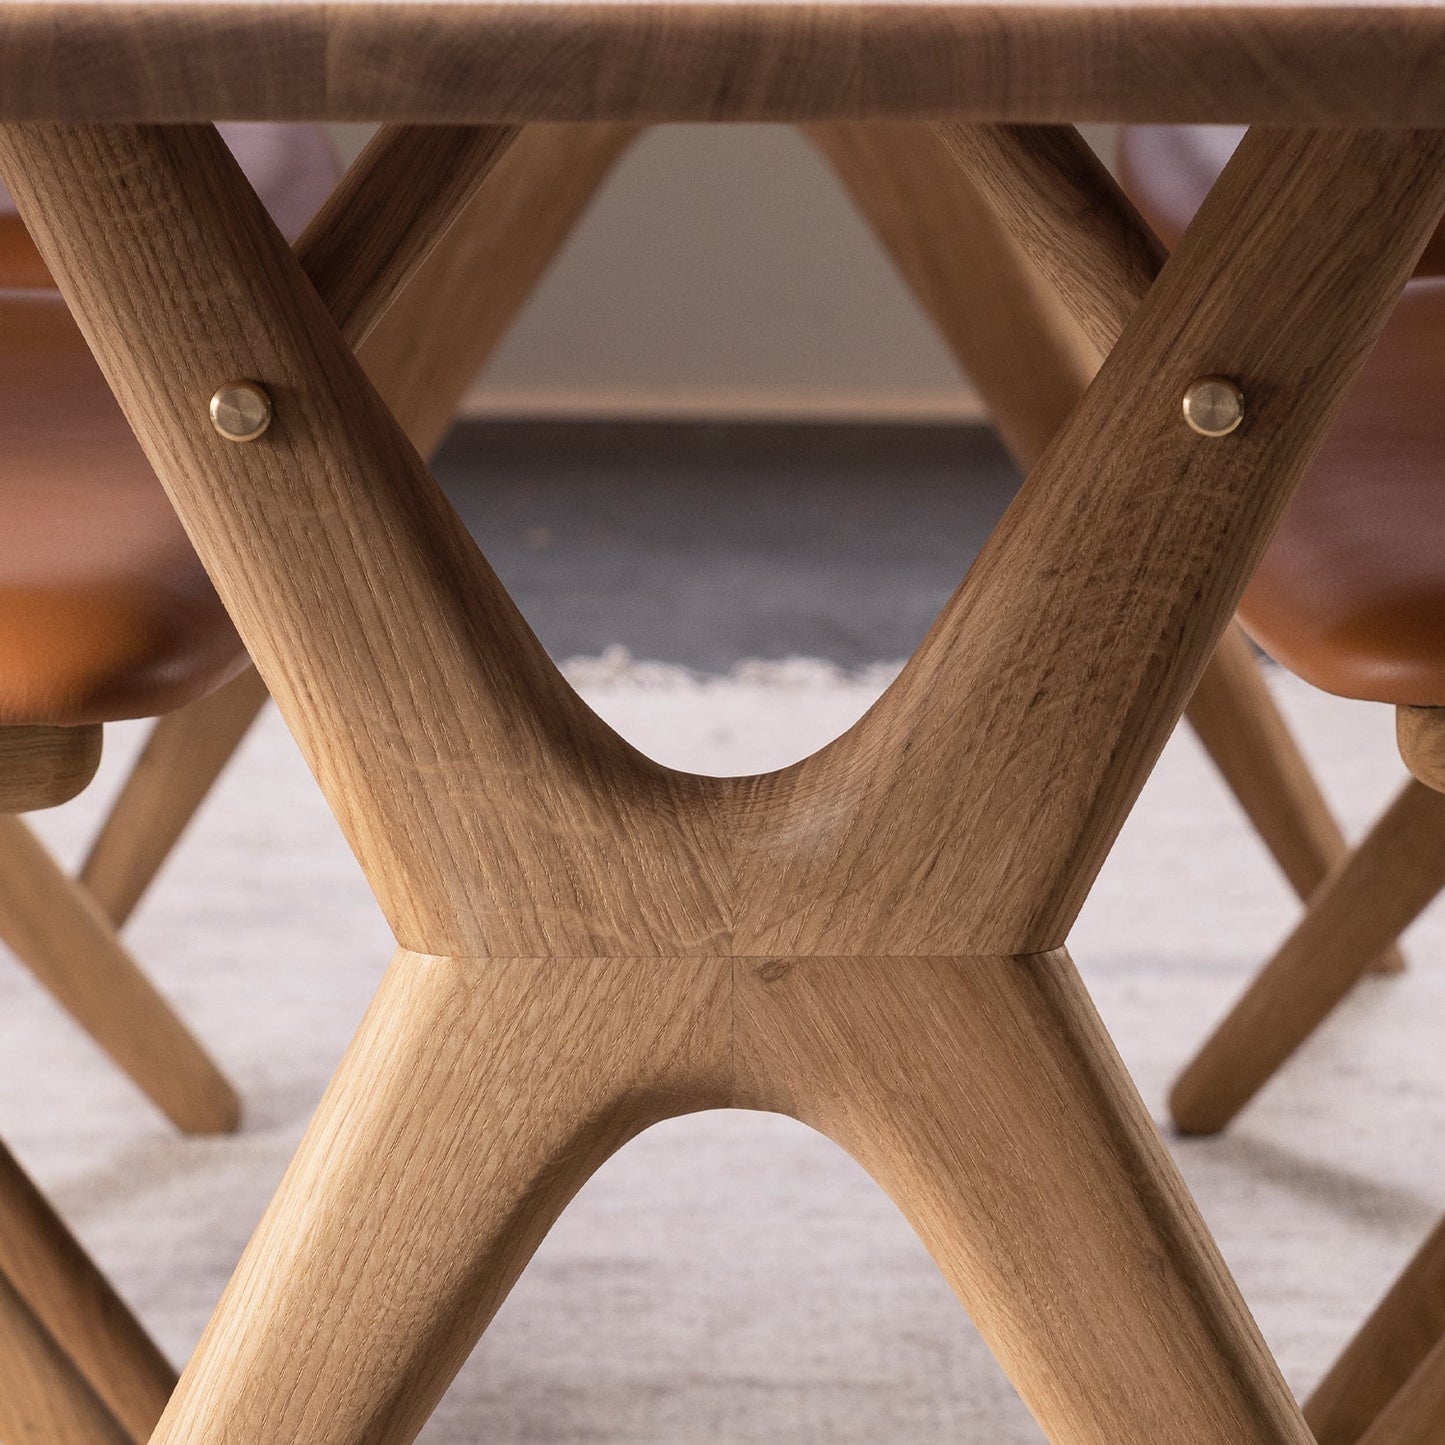 Rose Hill Oak Dining Table With Rounded Corners With Brass - 200cm Extending